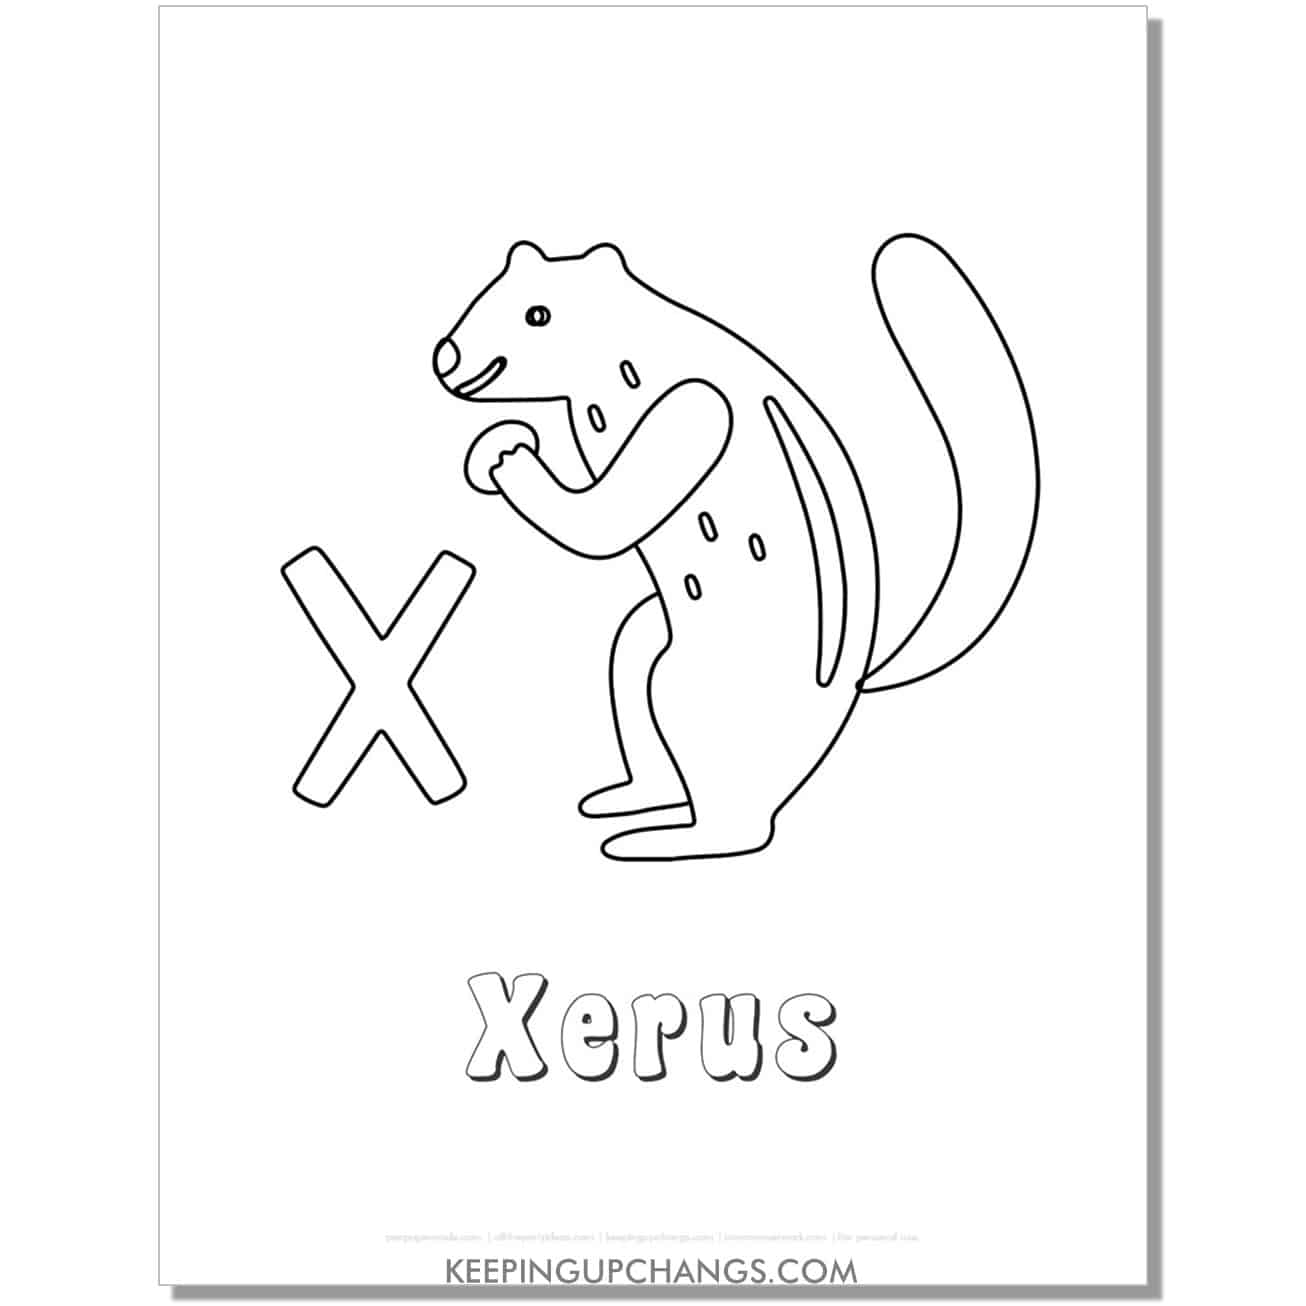 fun abc x coloring page with xerus hand drawing.